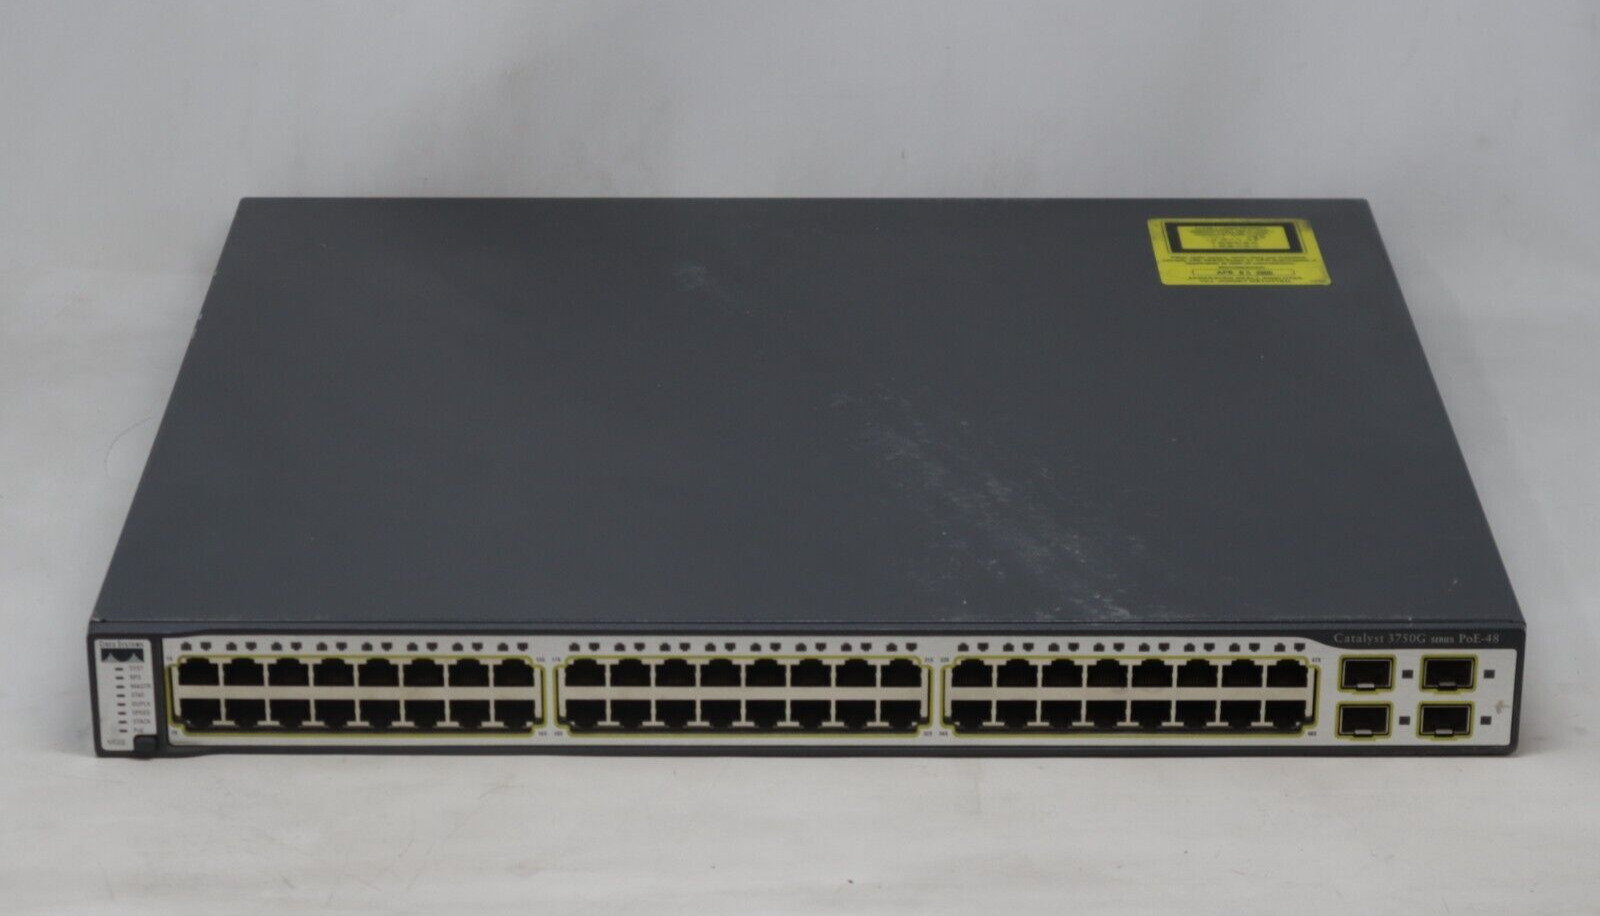 Cisco Catalyst WS-C3750G-48PS-E 48 Port GbE Gigabit Ethernet Switch Managed